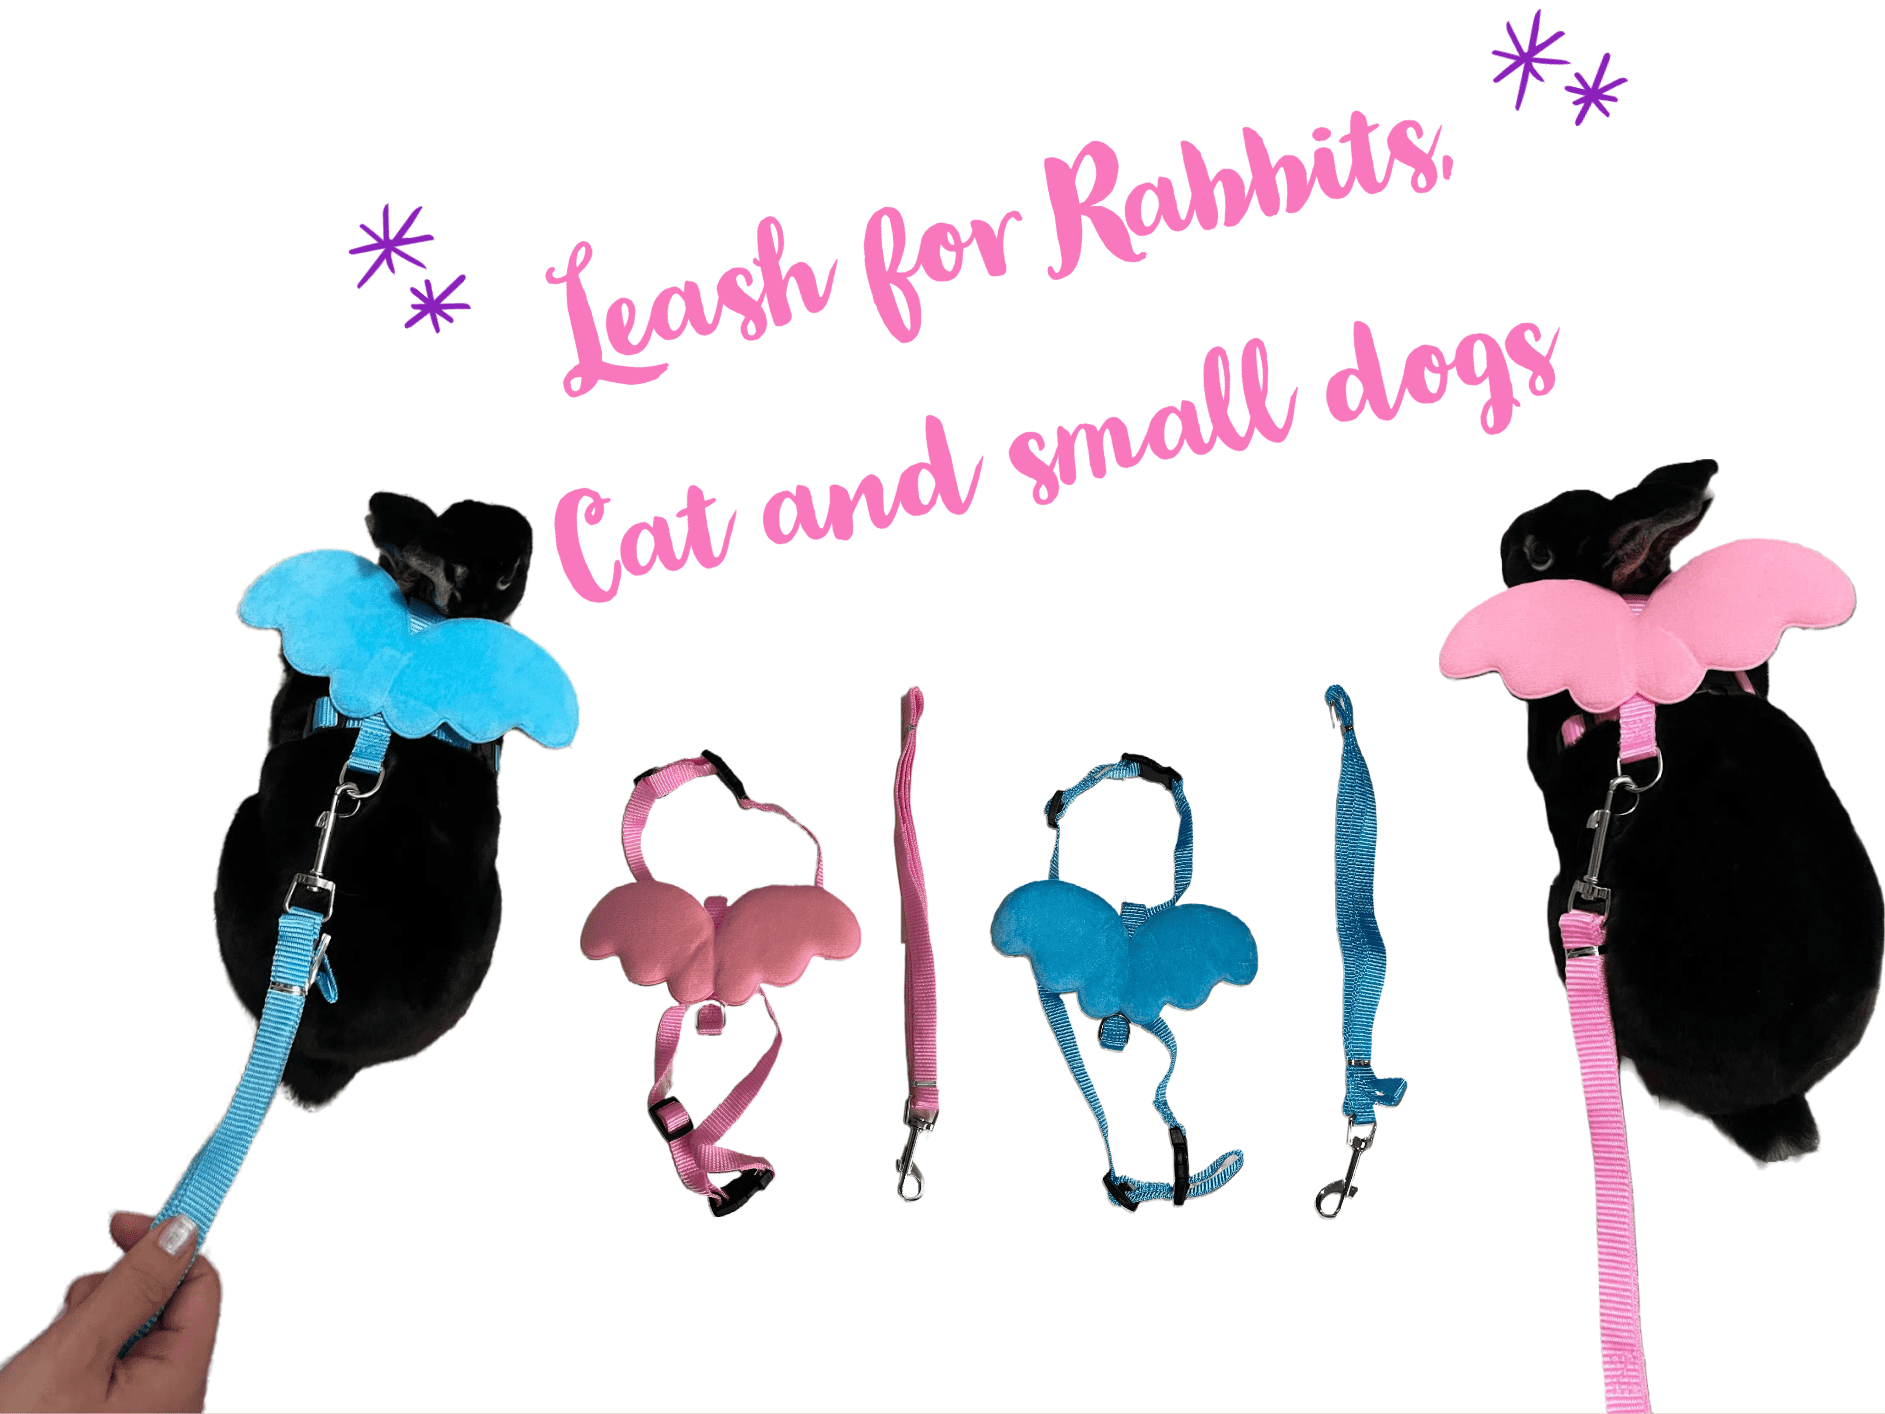 harness and leash for rabbits,cat and small dog.jpeg